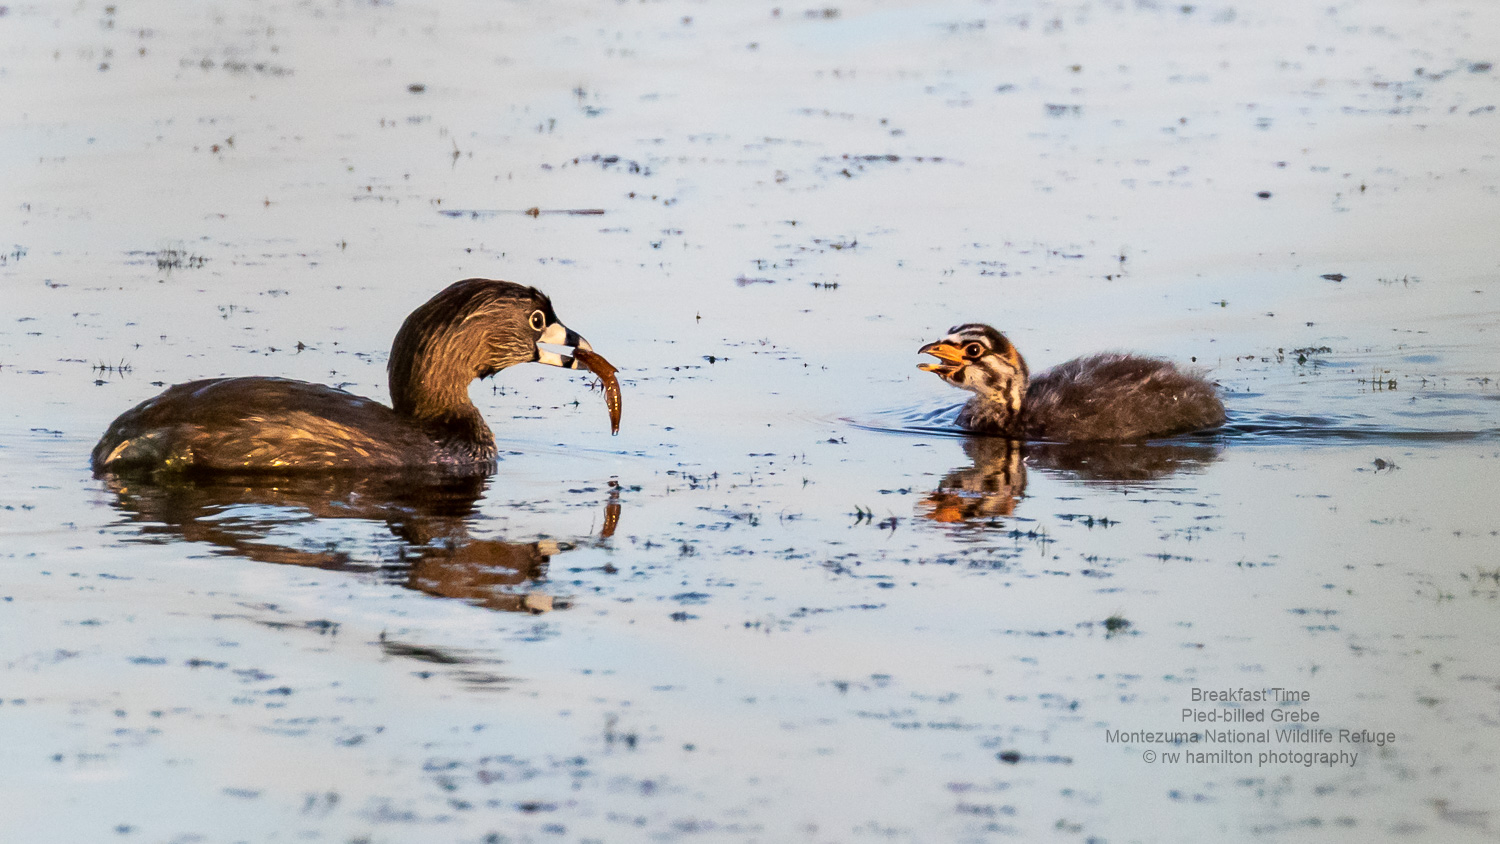 Breakfast for Pied-billed Grebe chick